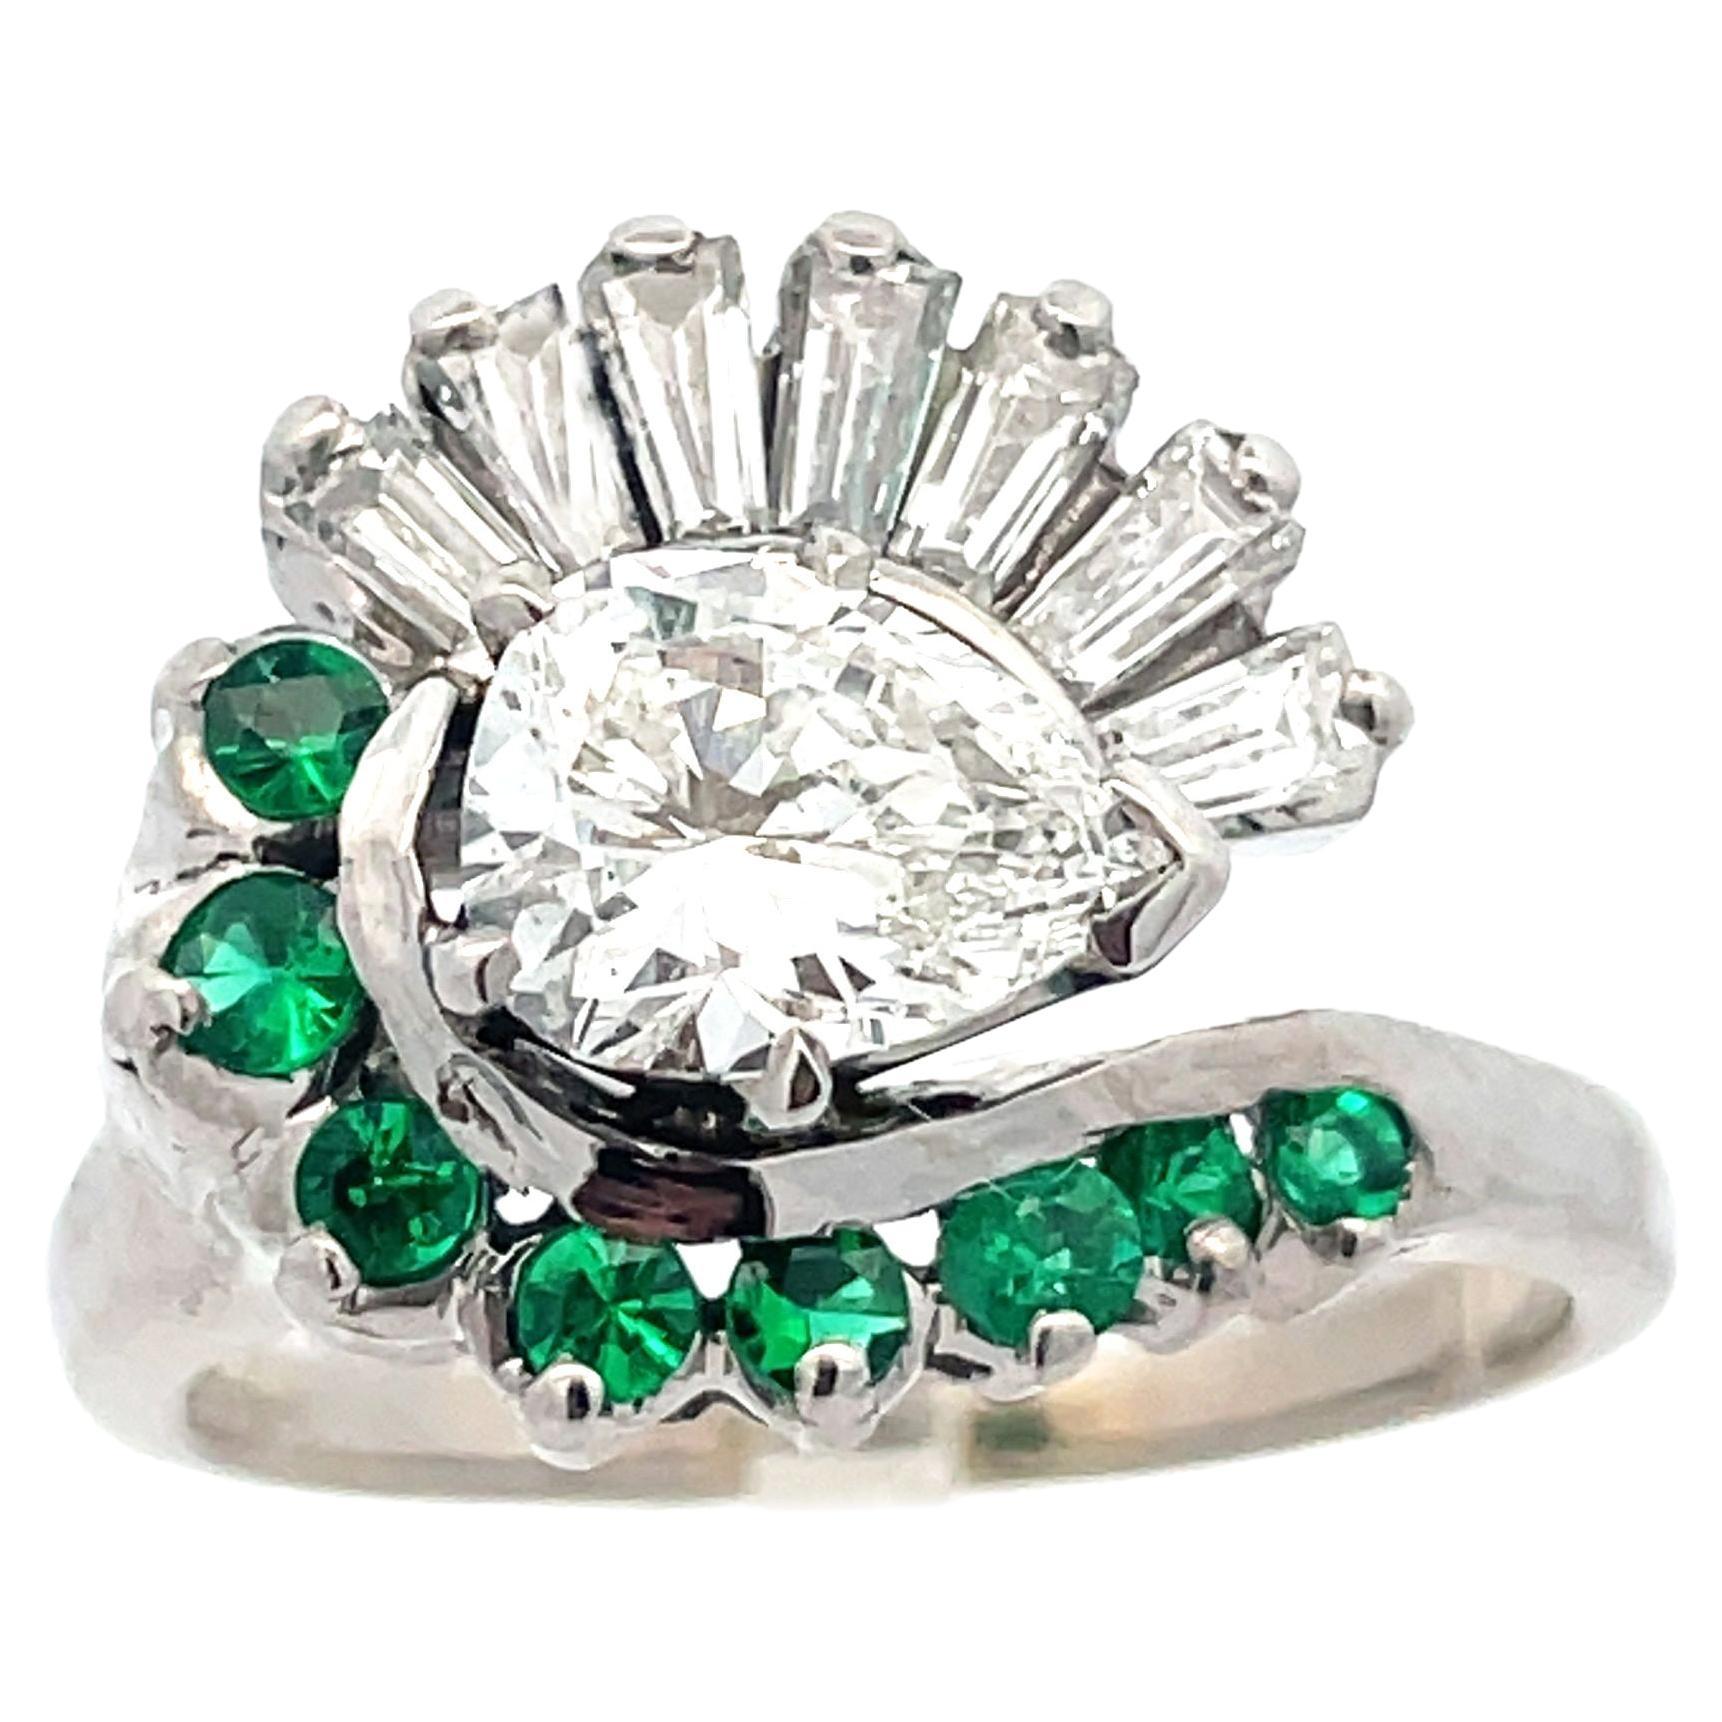 1950s 14k White Gold Pear Shaped Diamond and Emerald Ring with GIA Report